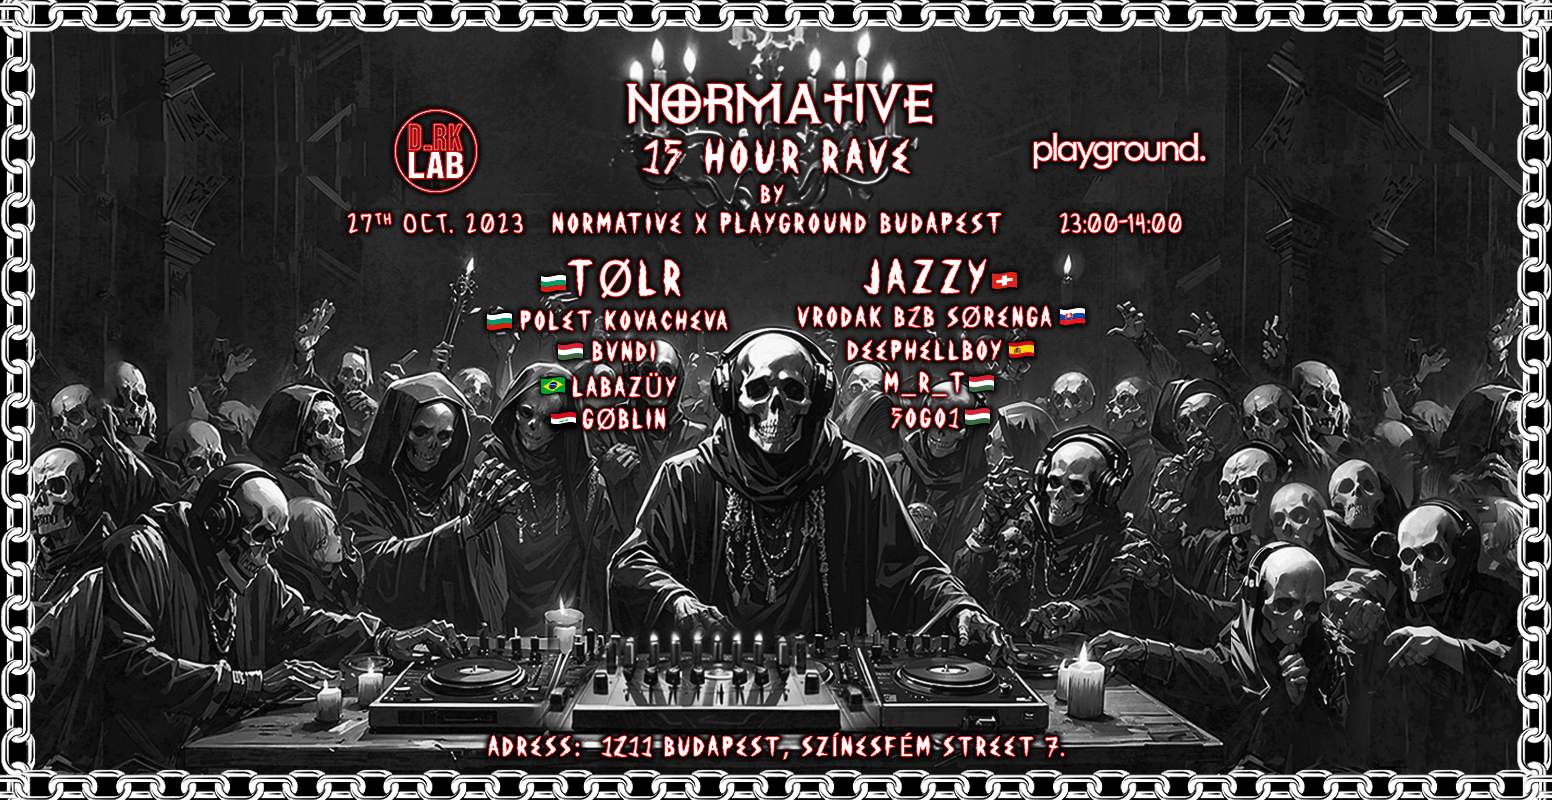 15 HOUR RAVE by NORMATIVE X Playground - Página frontal